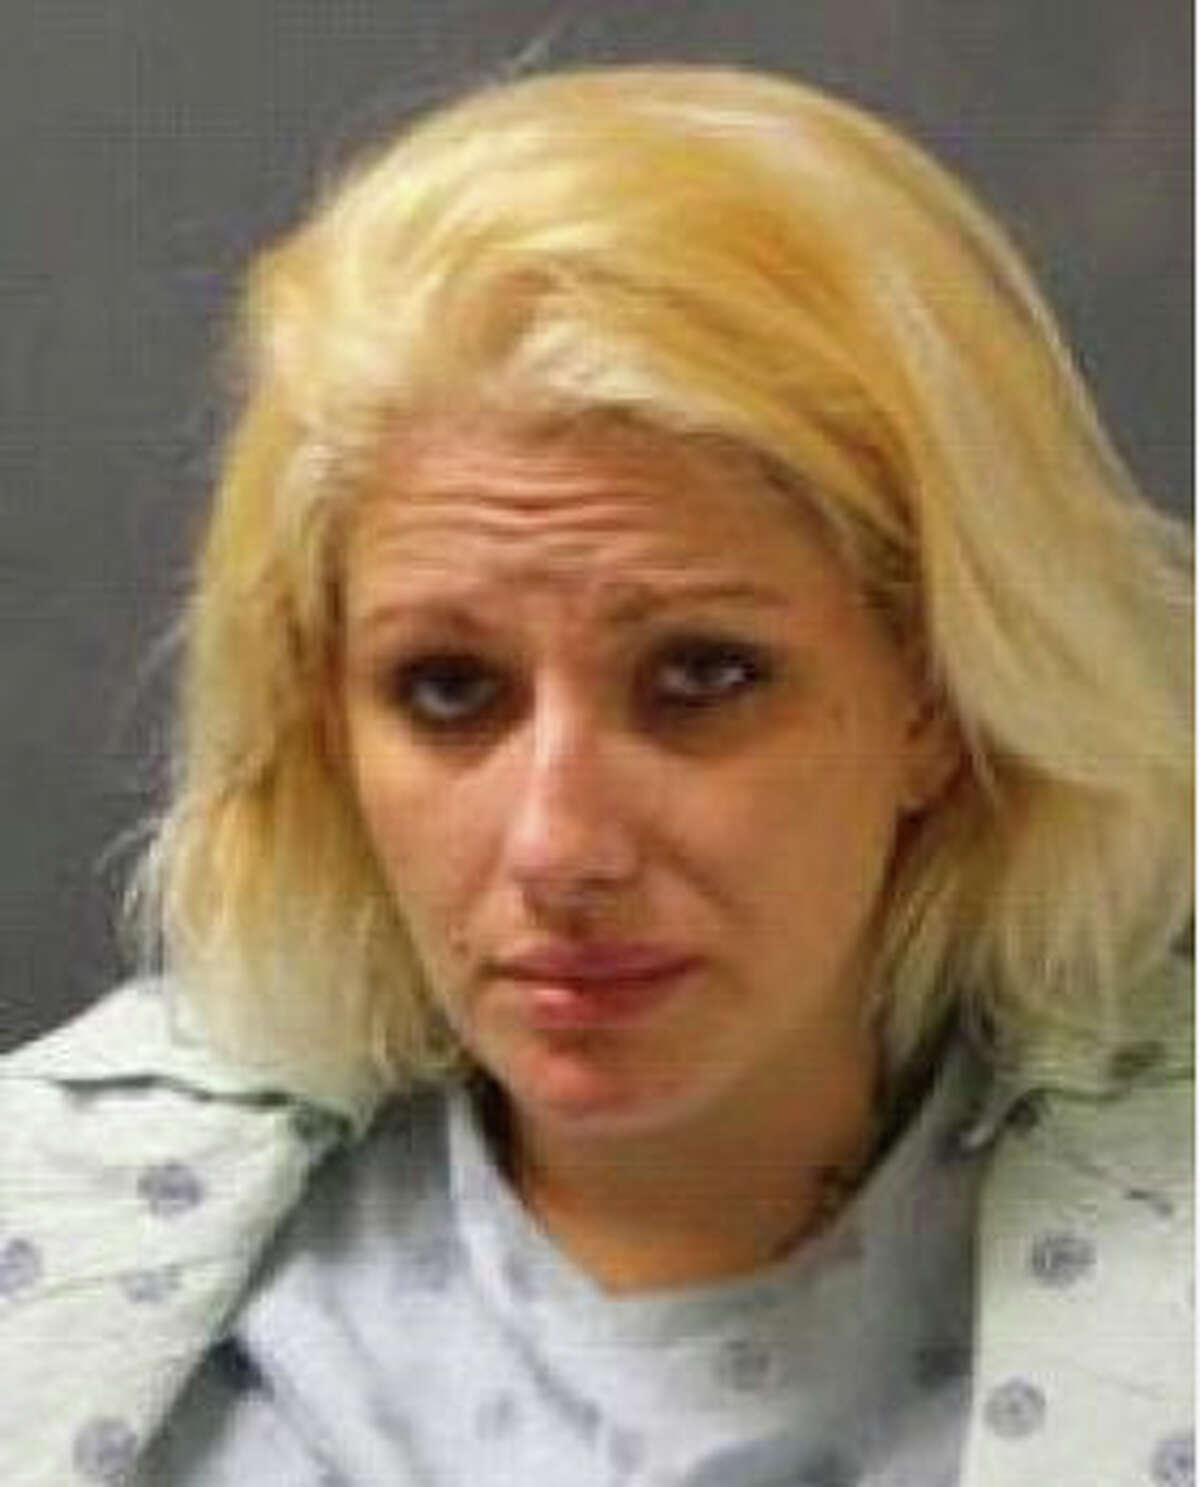 Kelly Jo Ivey, 29, who collided head-on with the deputy's patrol car, was charged with possession of methamphetamine as a result of the investigation into the crash.